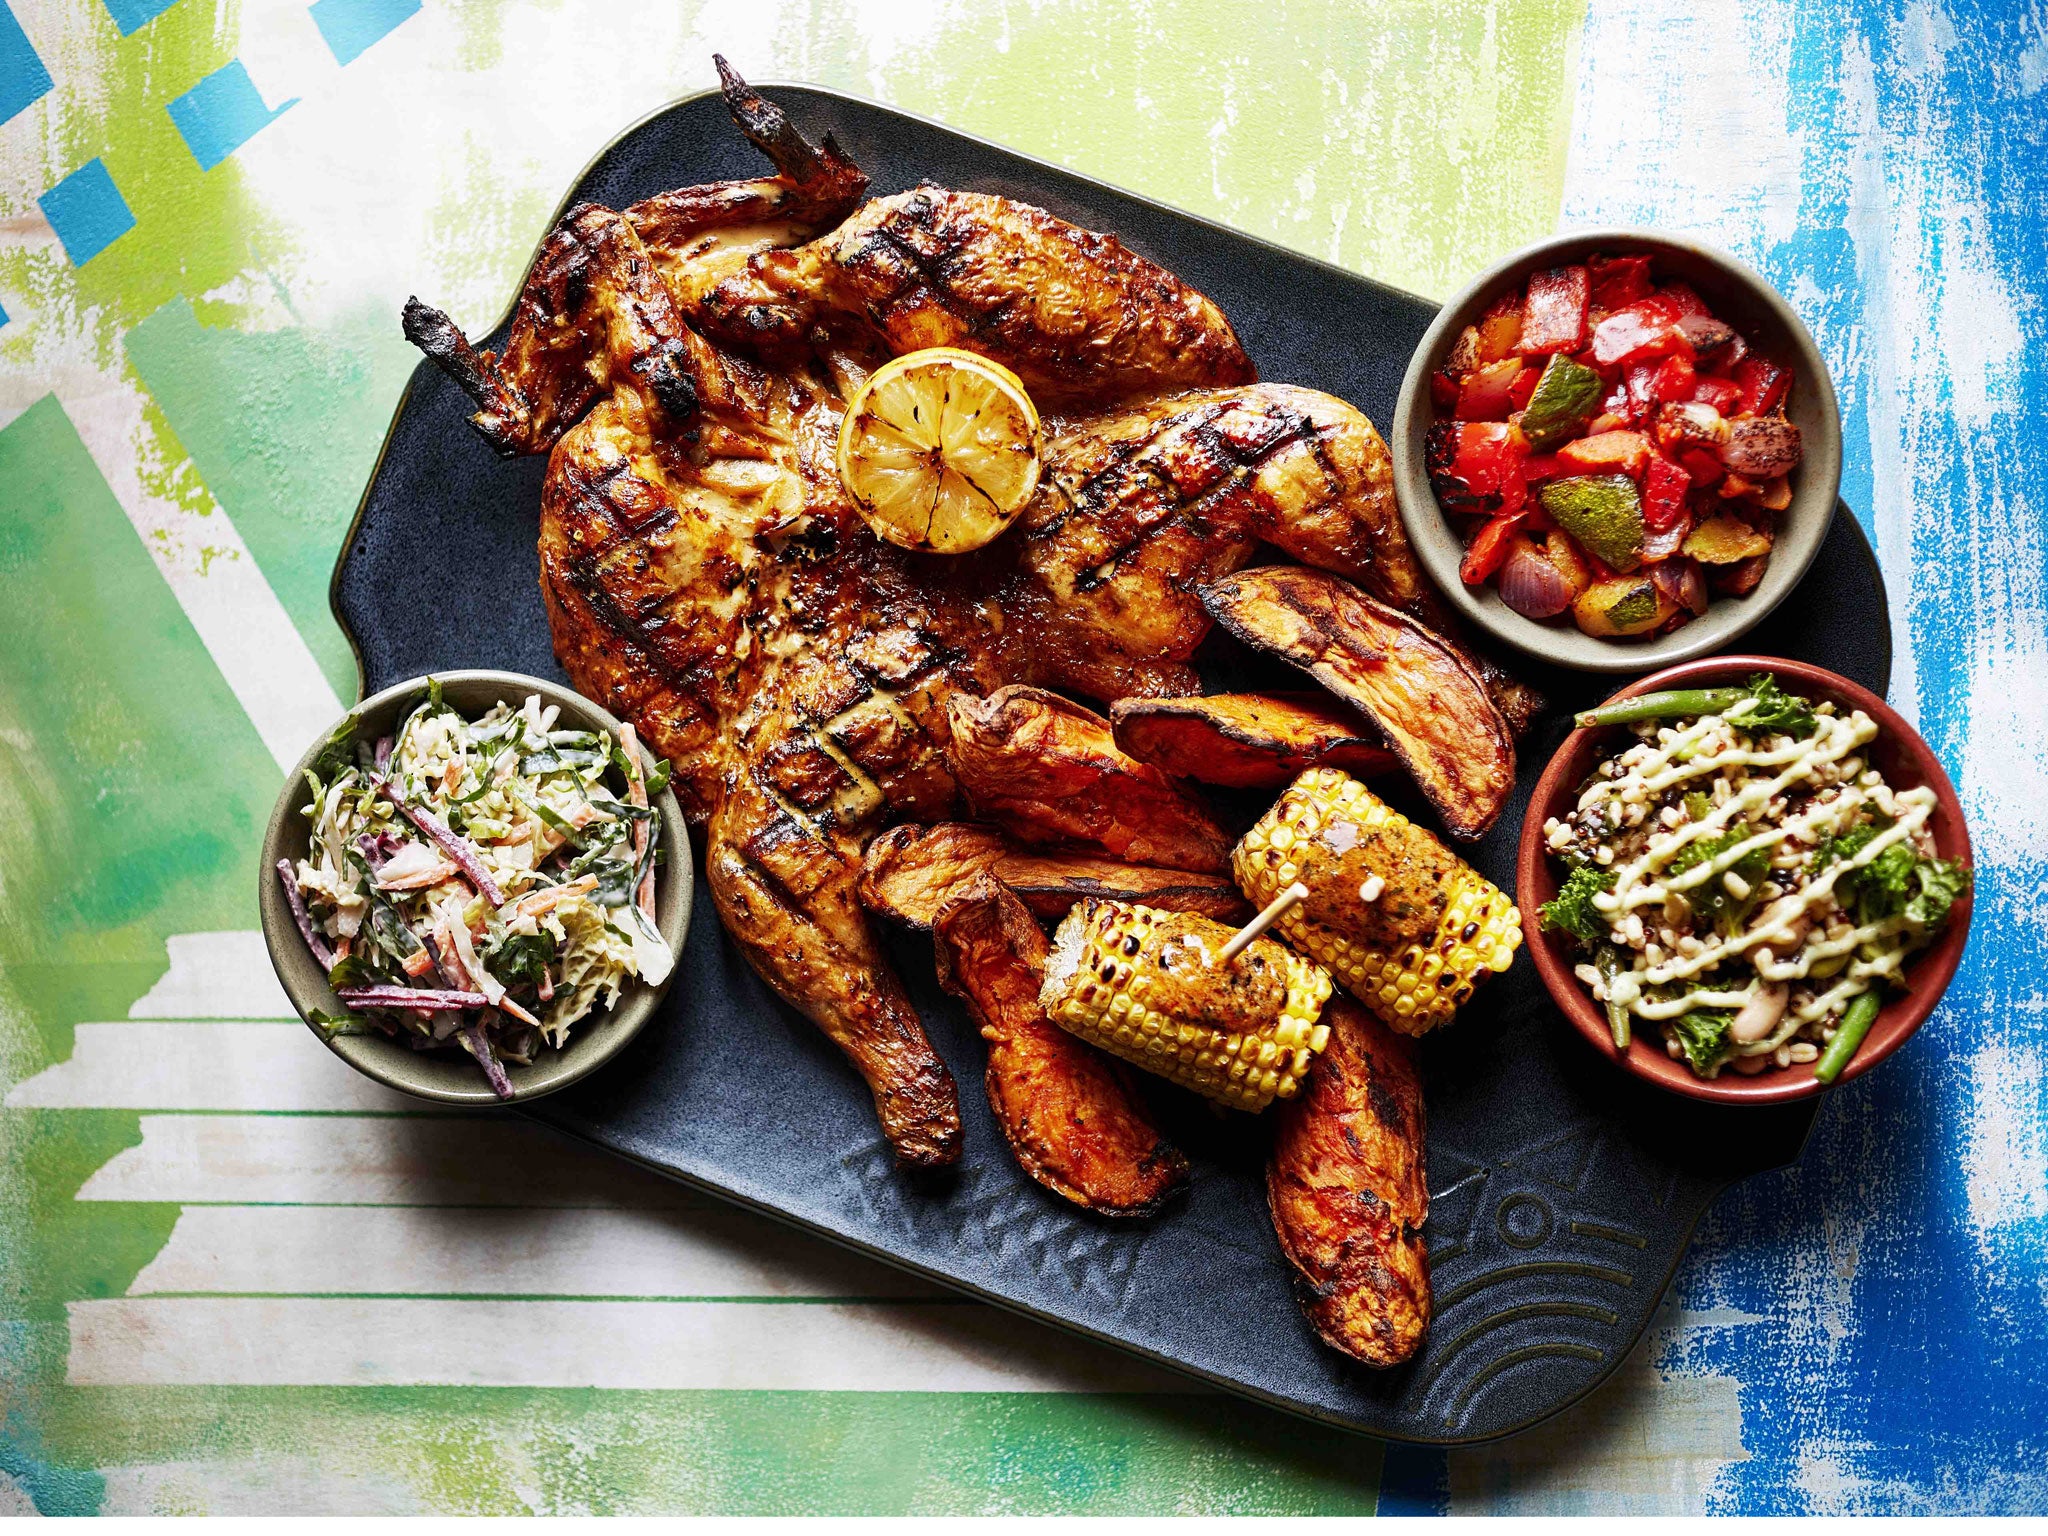 Nando’s has launched a new spring menu in May introducing a new range of healthy food choices, drinks and even a dessert